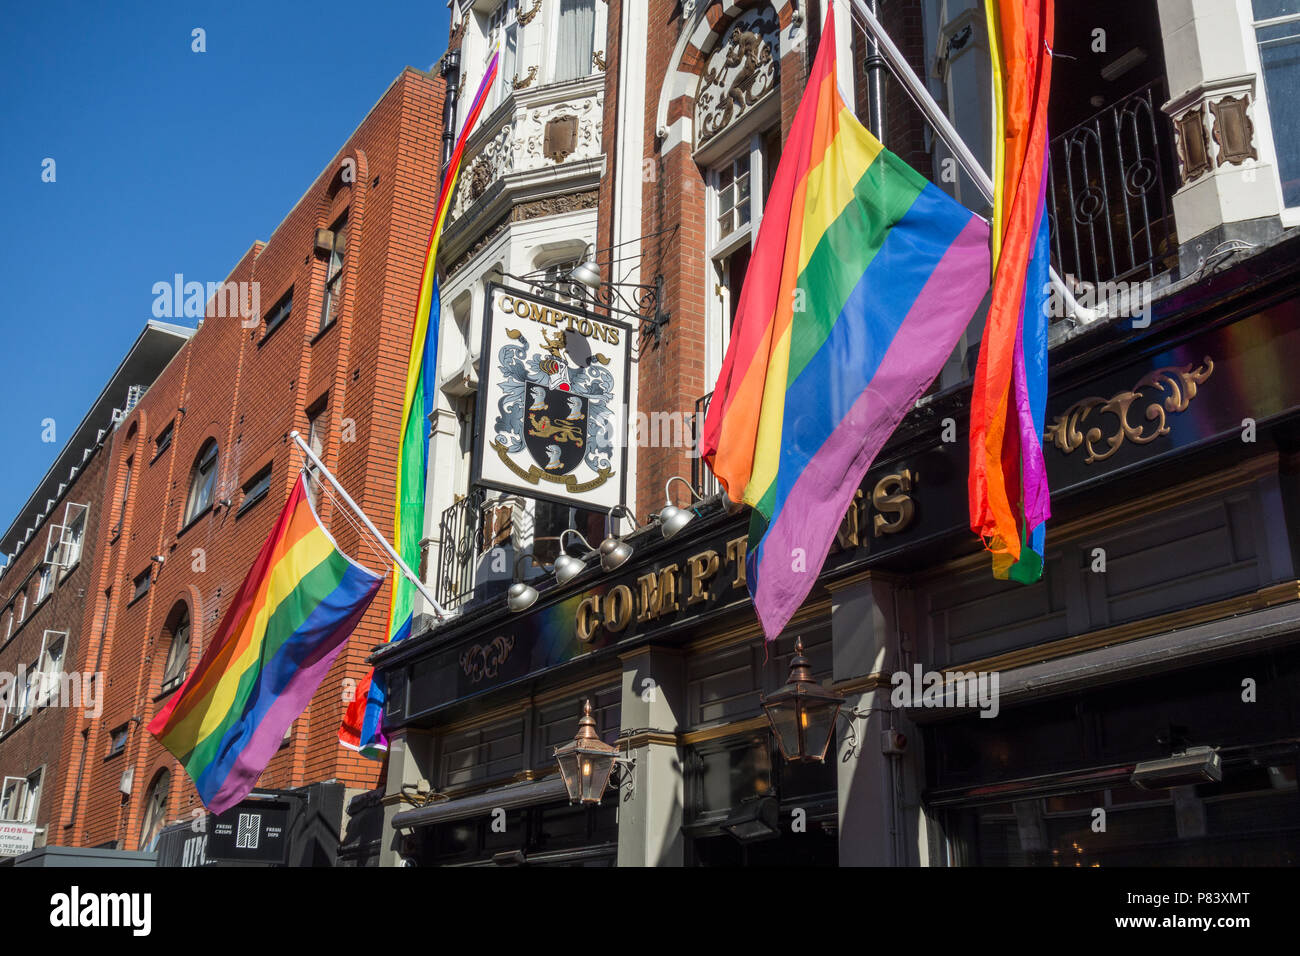 Comptons public house the day after the annual Pride in London LGBT parade, Soho, London, UK Stock Photo